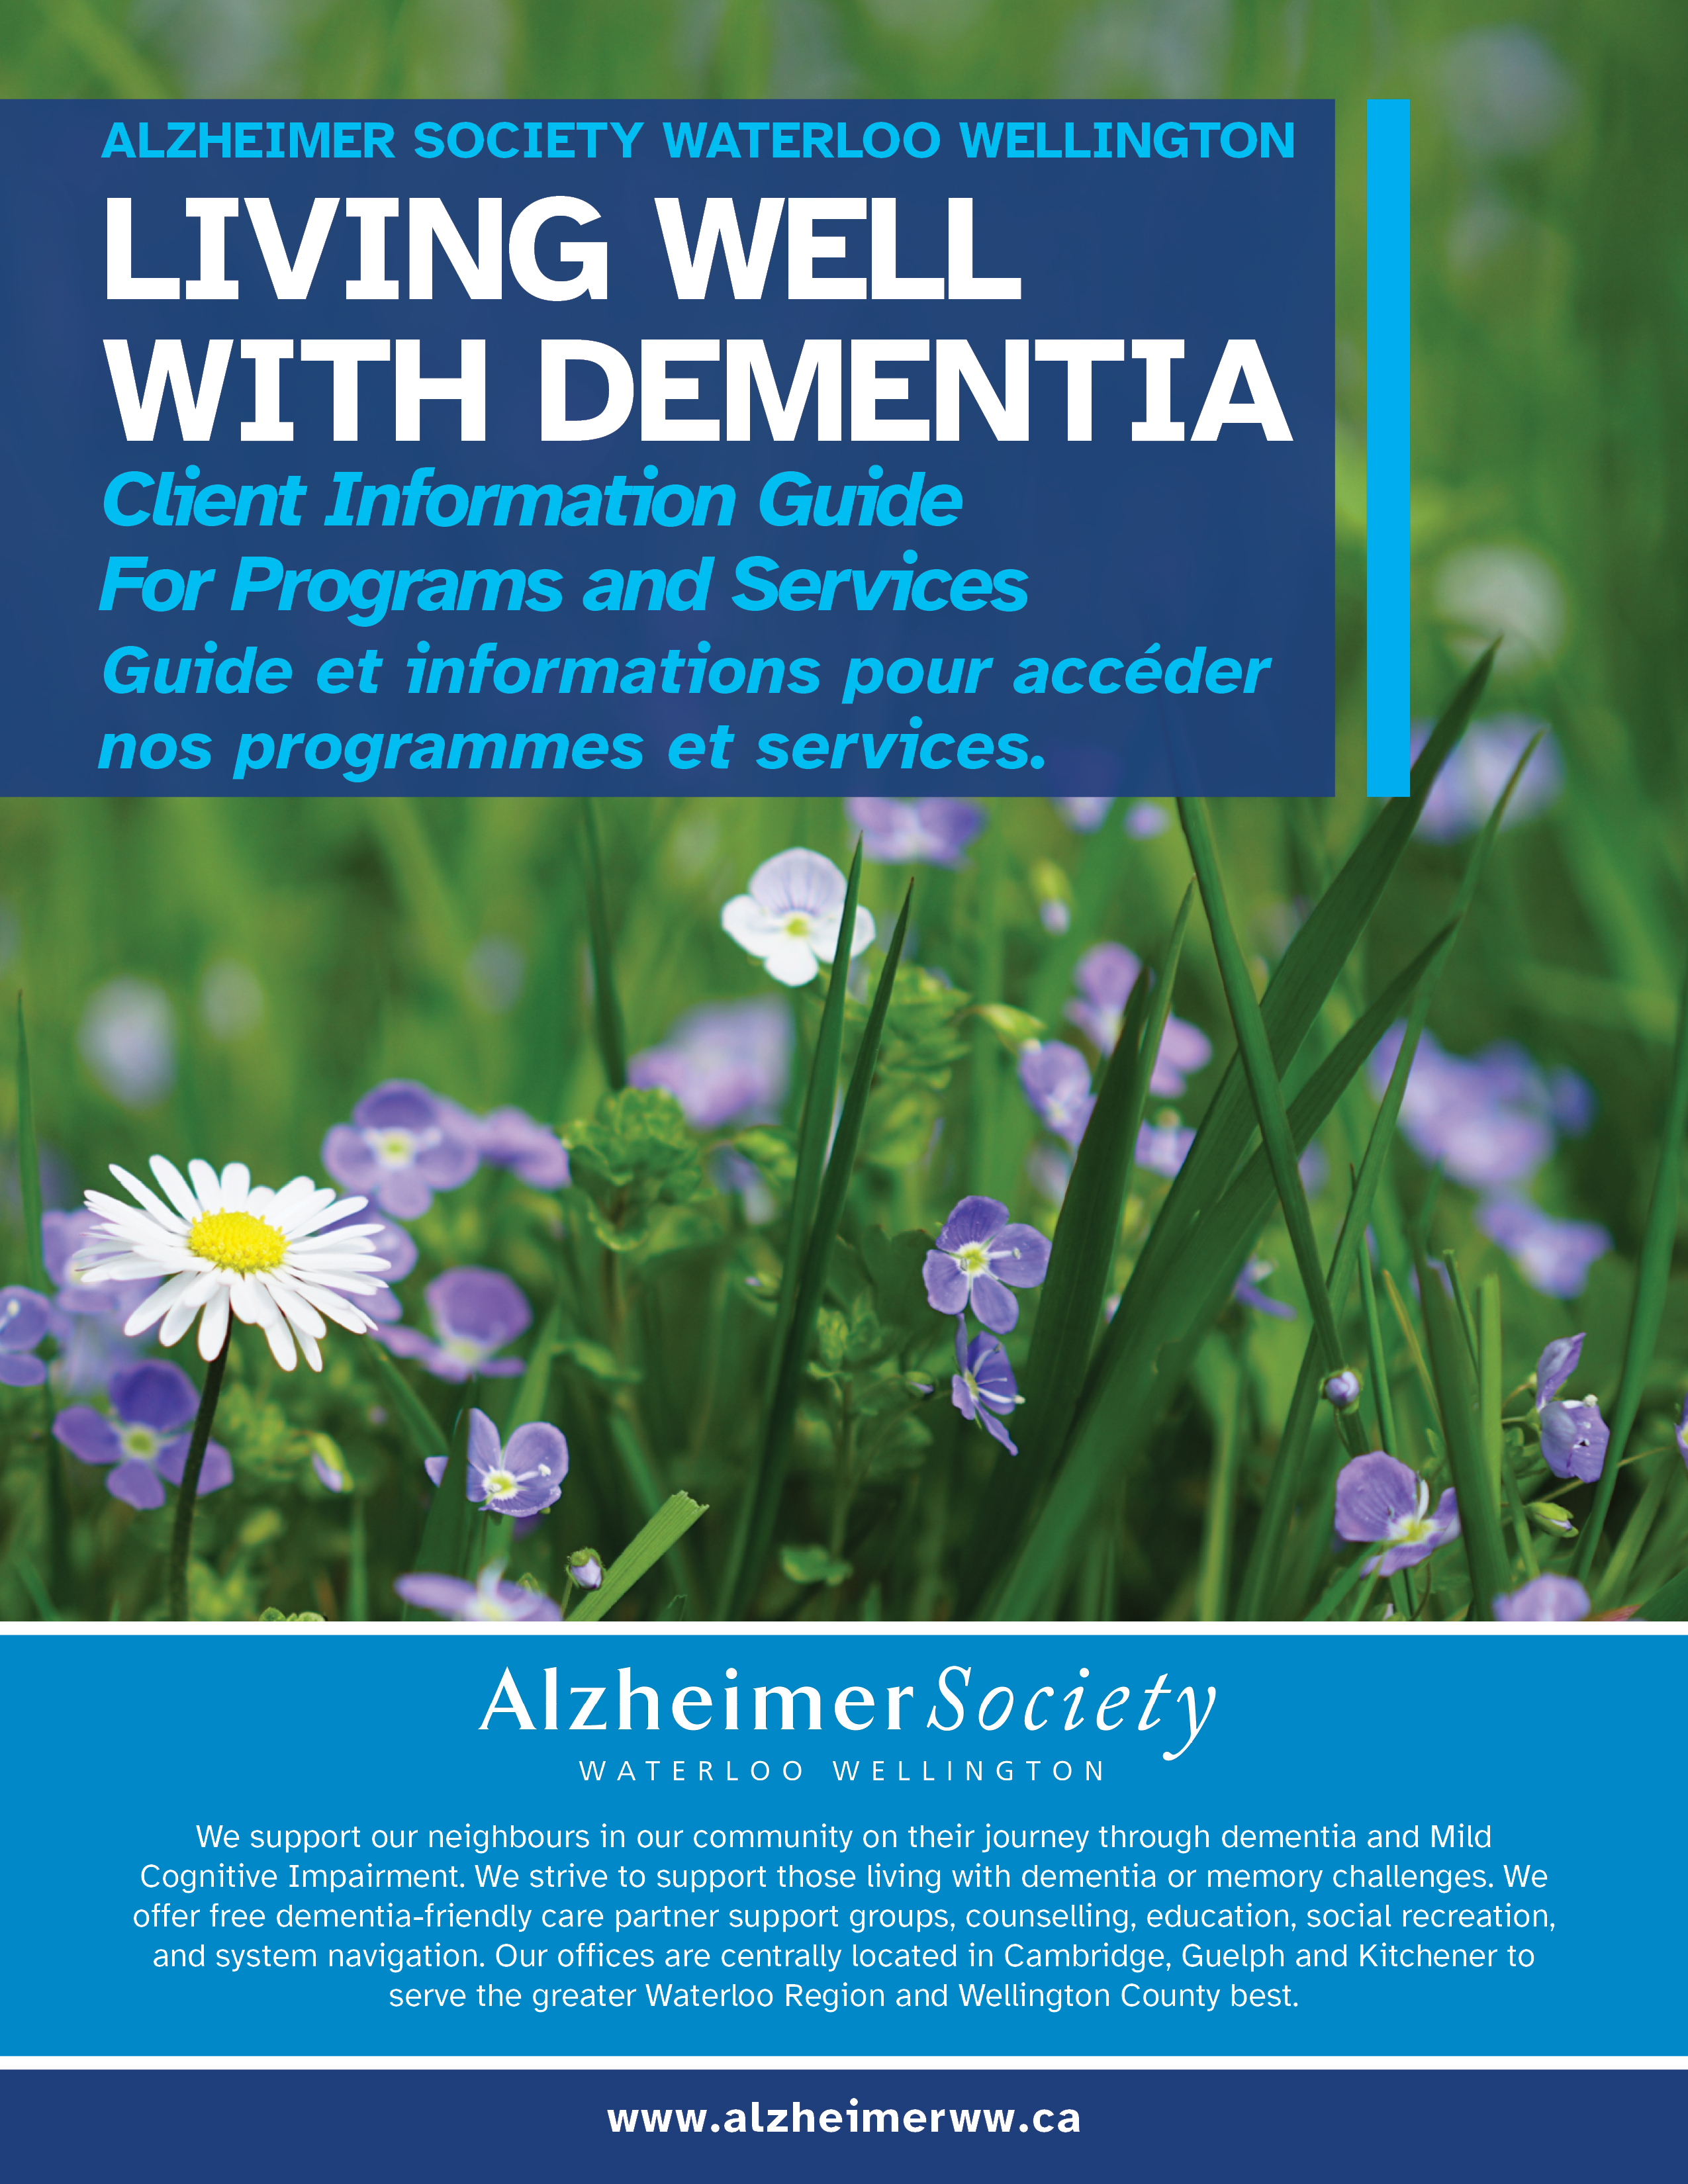 Title: Living Well With Dementia: Client Information Guide for Programs and Services. Photo: Field of Flowers.